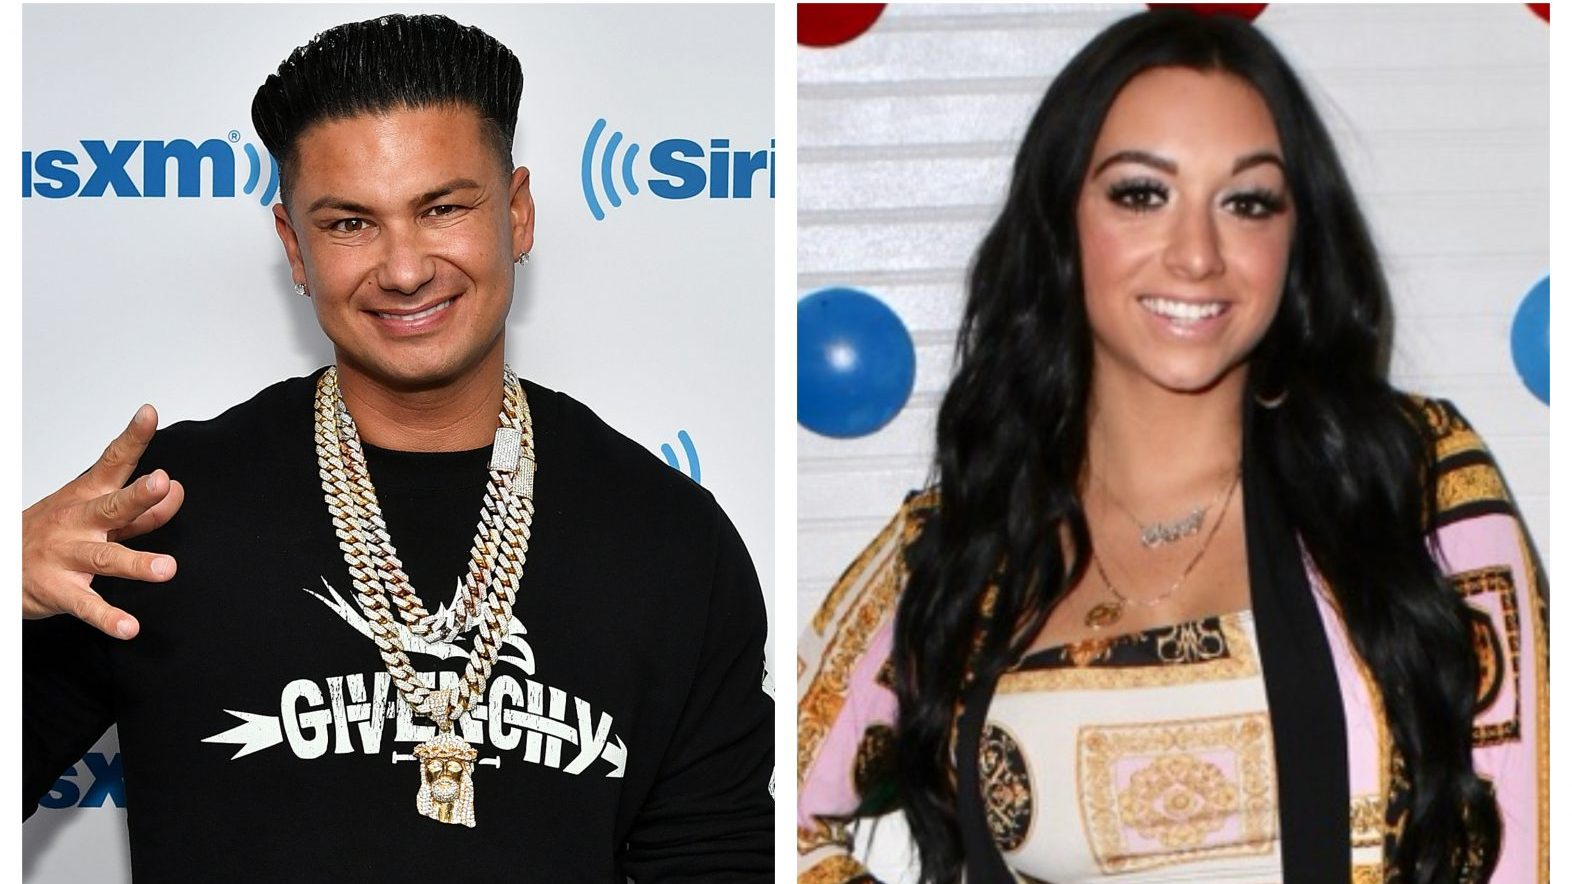 jersey shore double shot at love